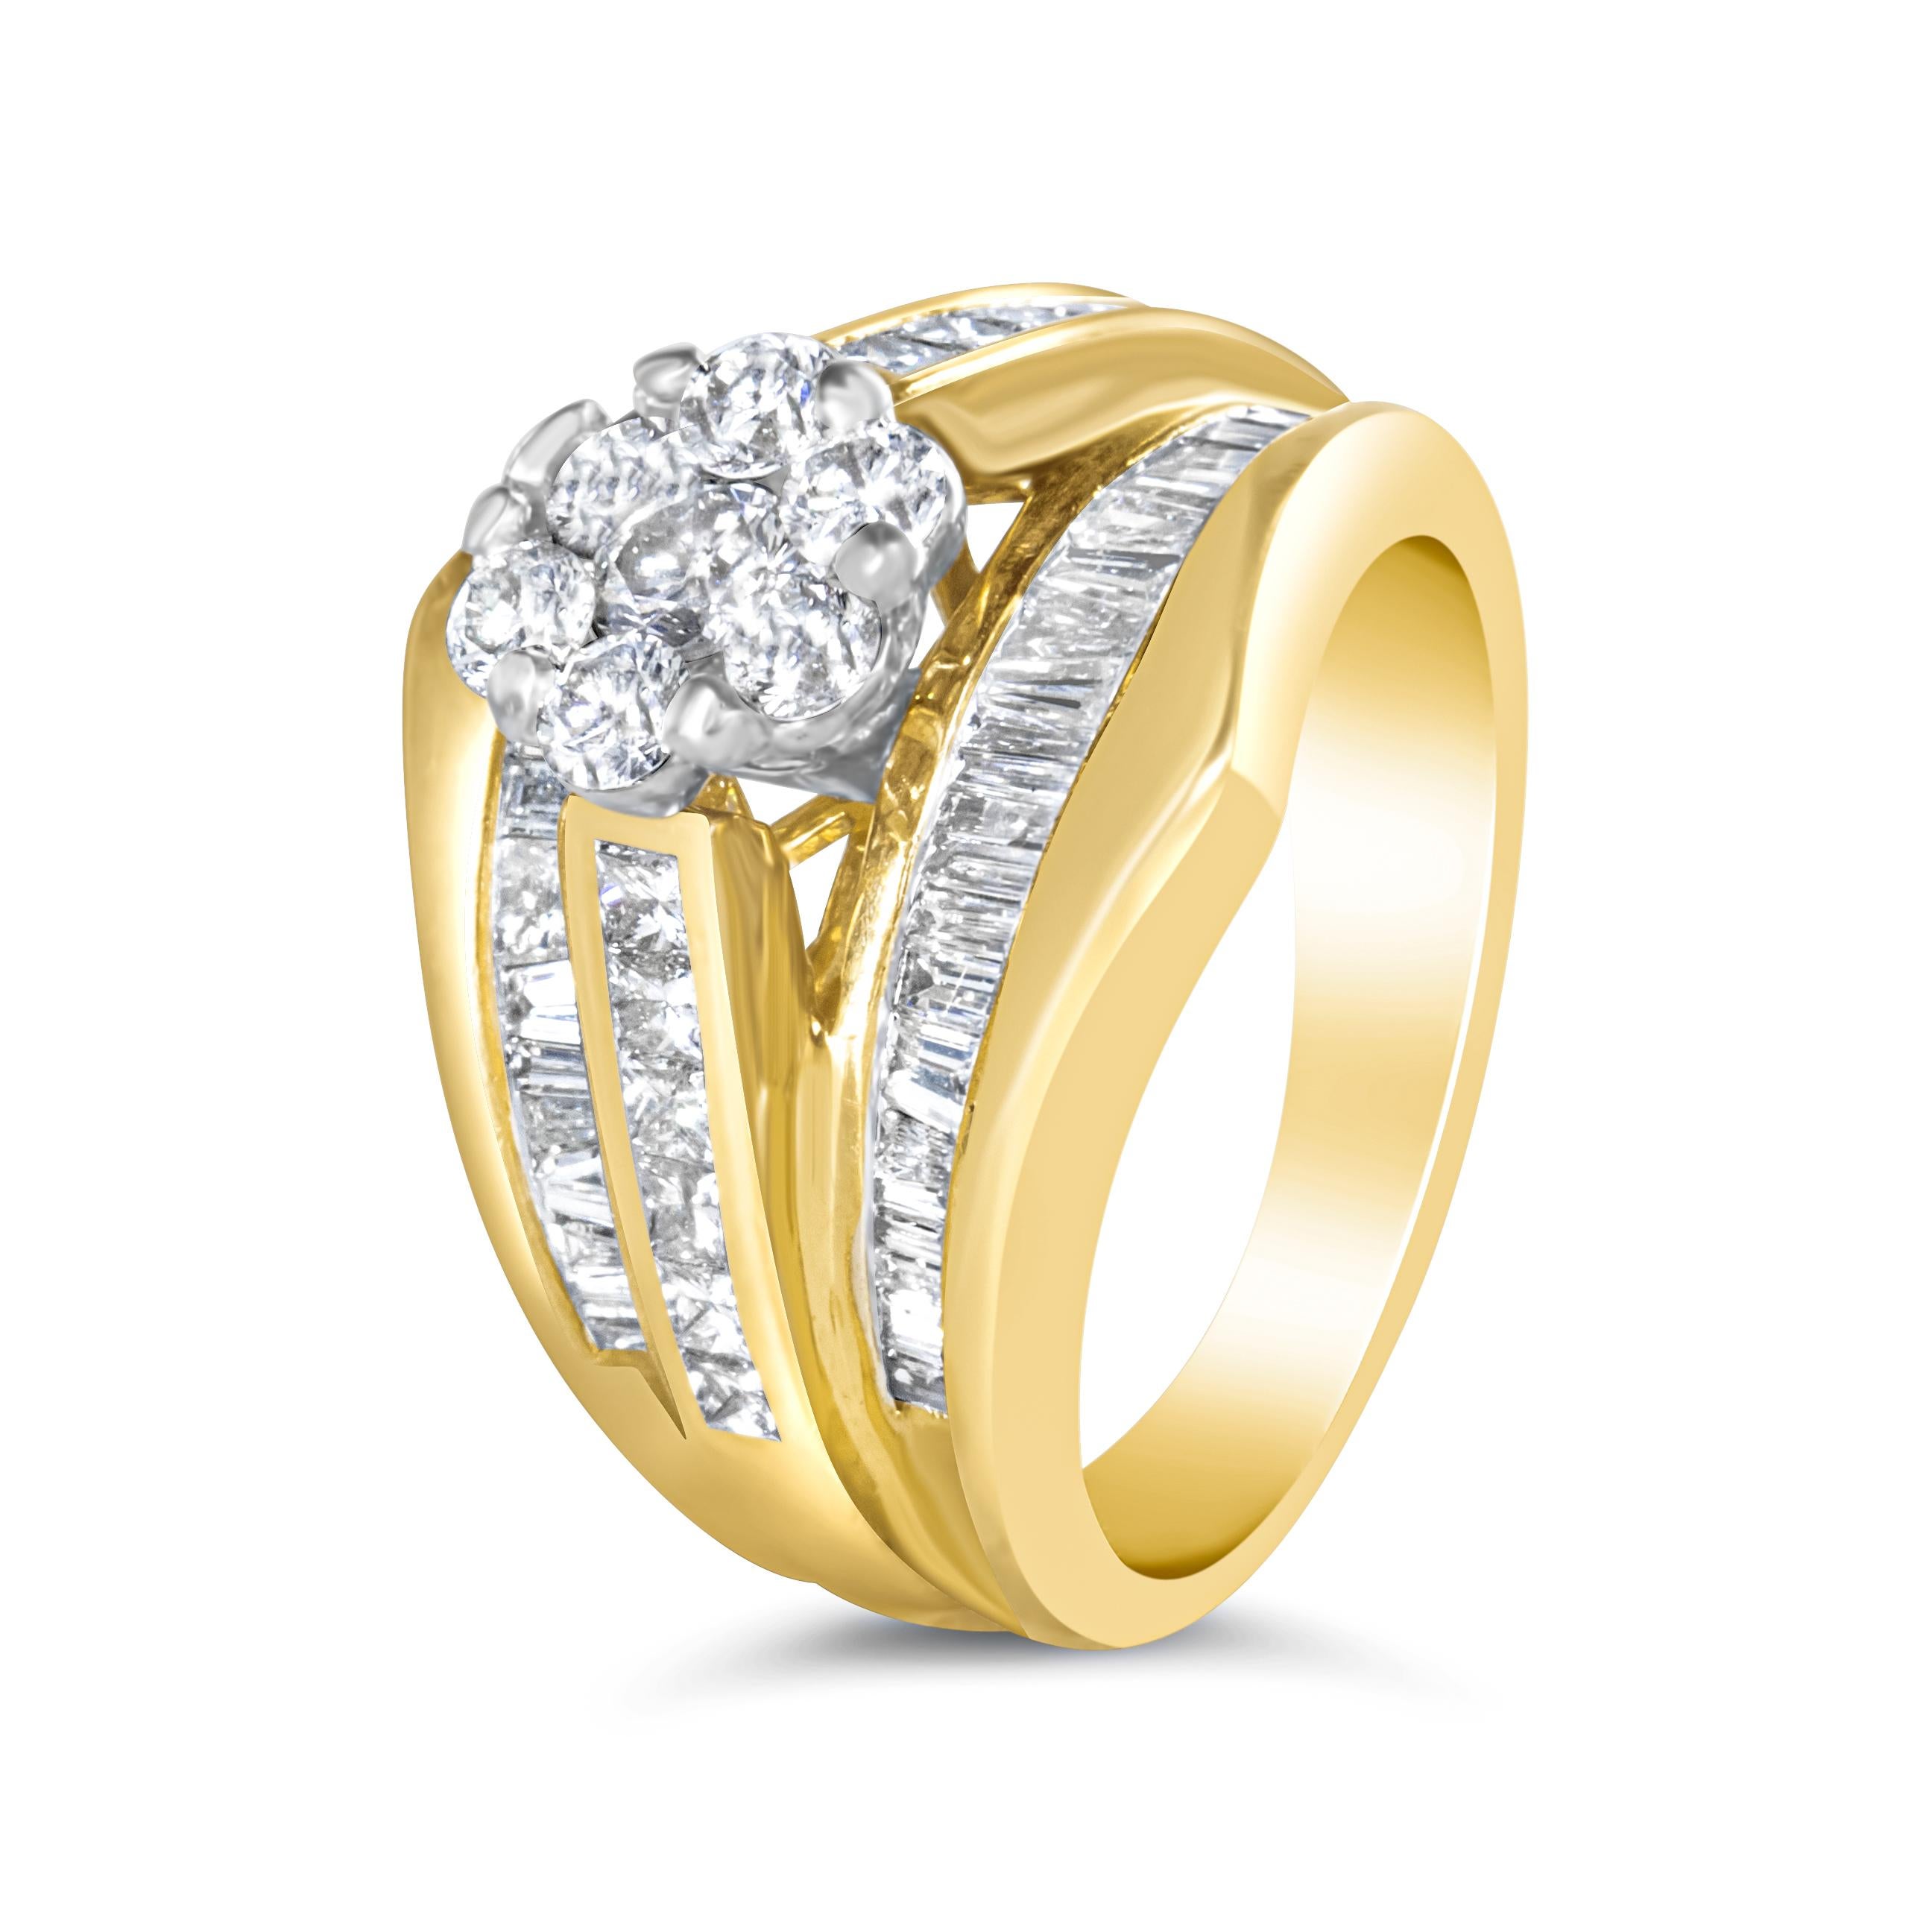 For Sale:  14K Yellow Gold 2-1/3 Carat Diamond Cluster Band Engagement Ring & Wedding Band 4